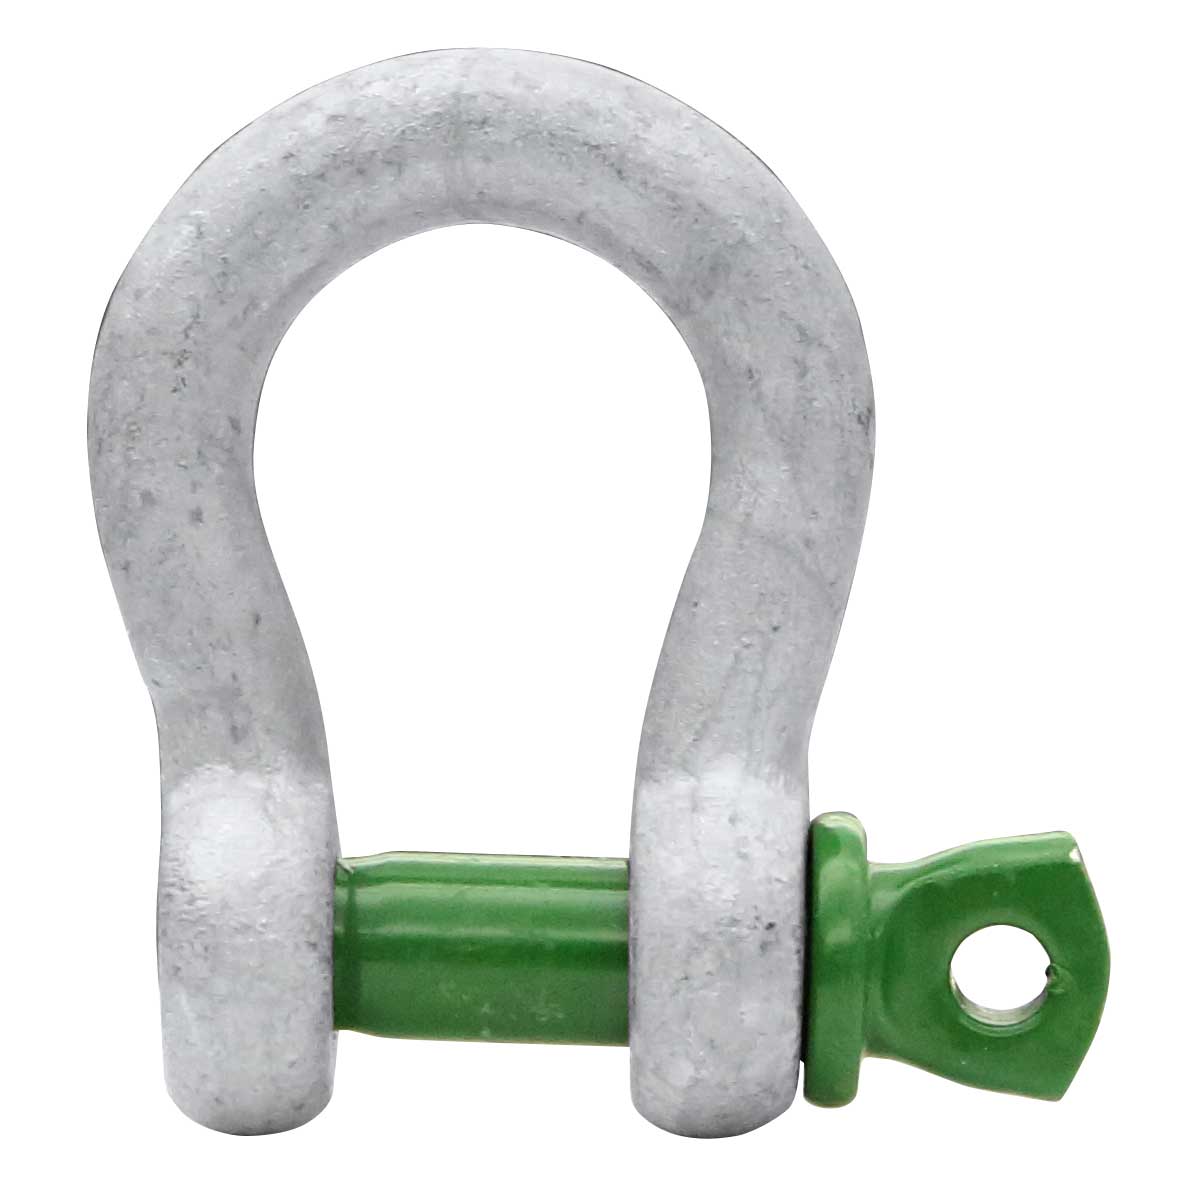 5/16" Van Beest Green Pin® Screw Pin Anchor Shackle | G-4161 - 0.75 Ton primary image